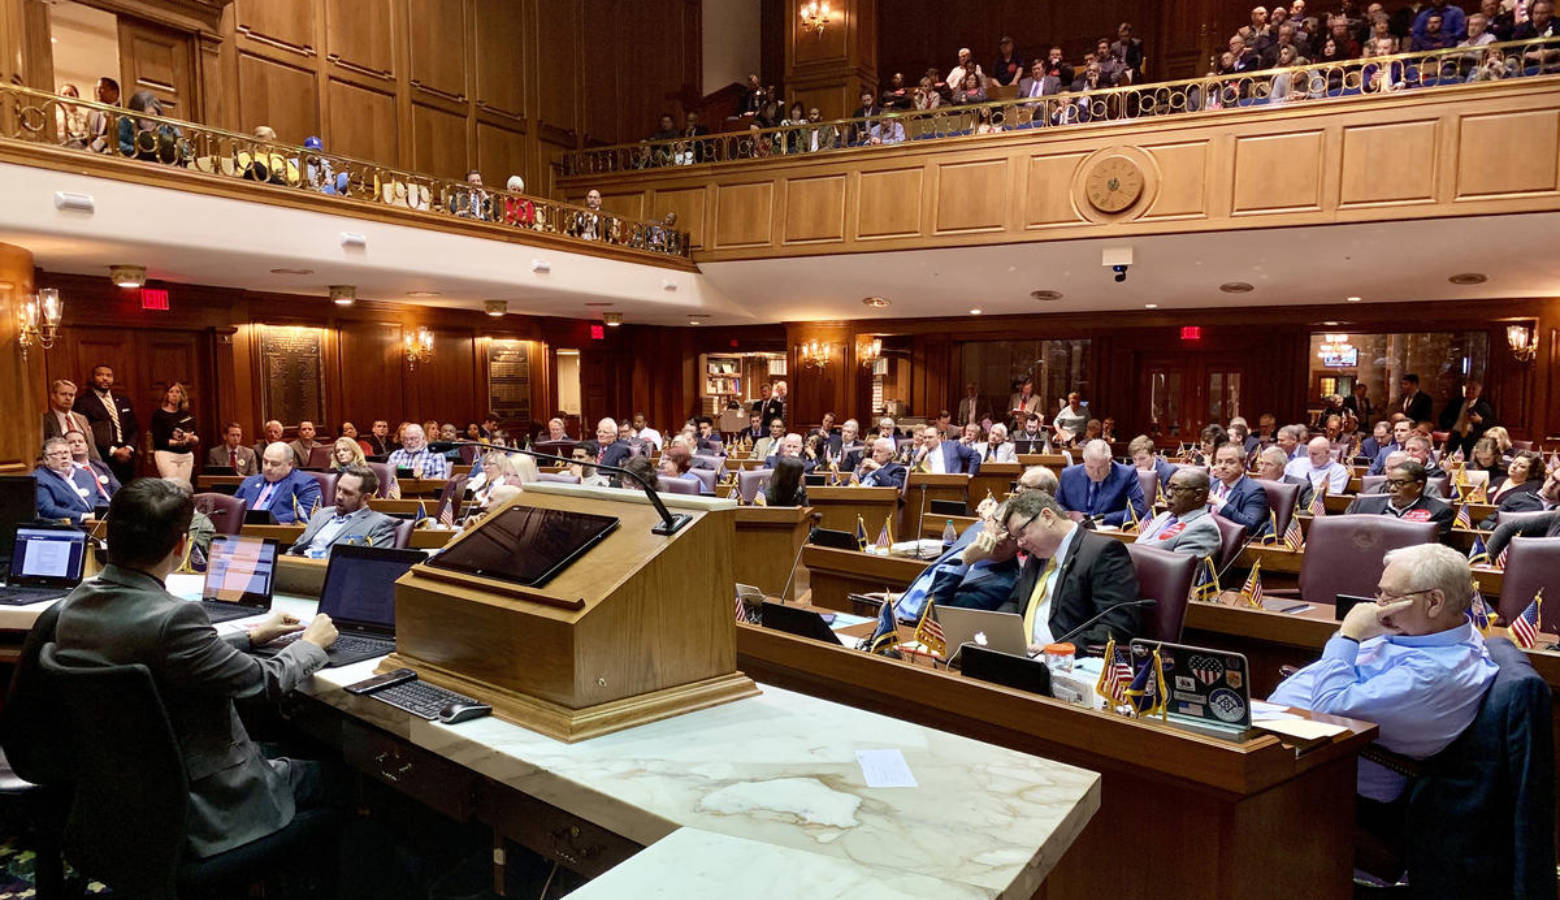 The House Public Policy Committee considers testimony on a major gaming bill. (Brandon Smith/IPB News)